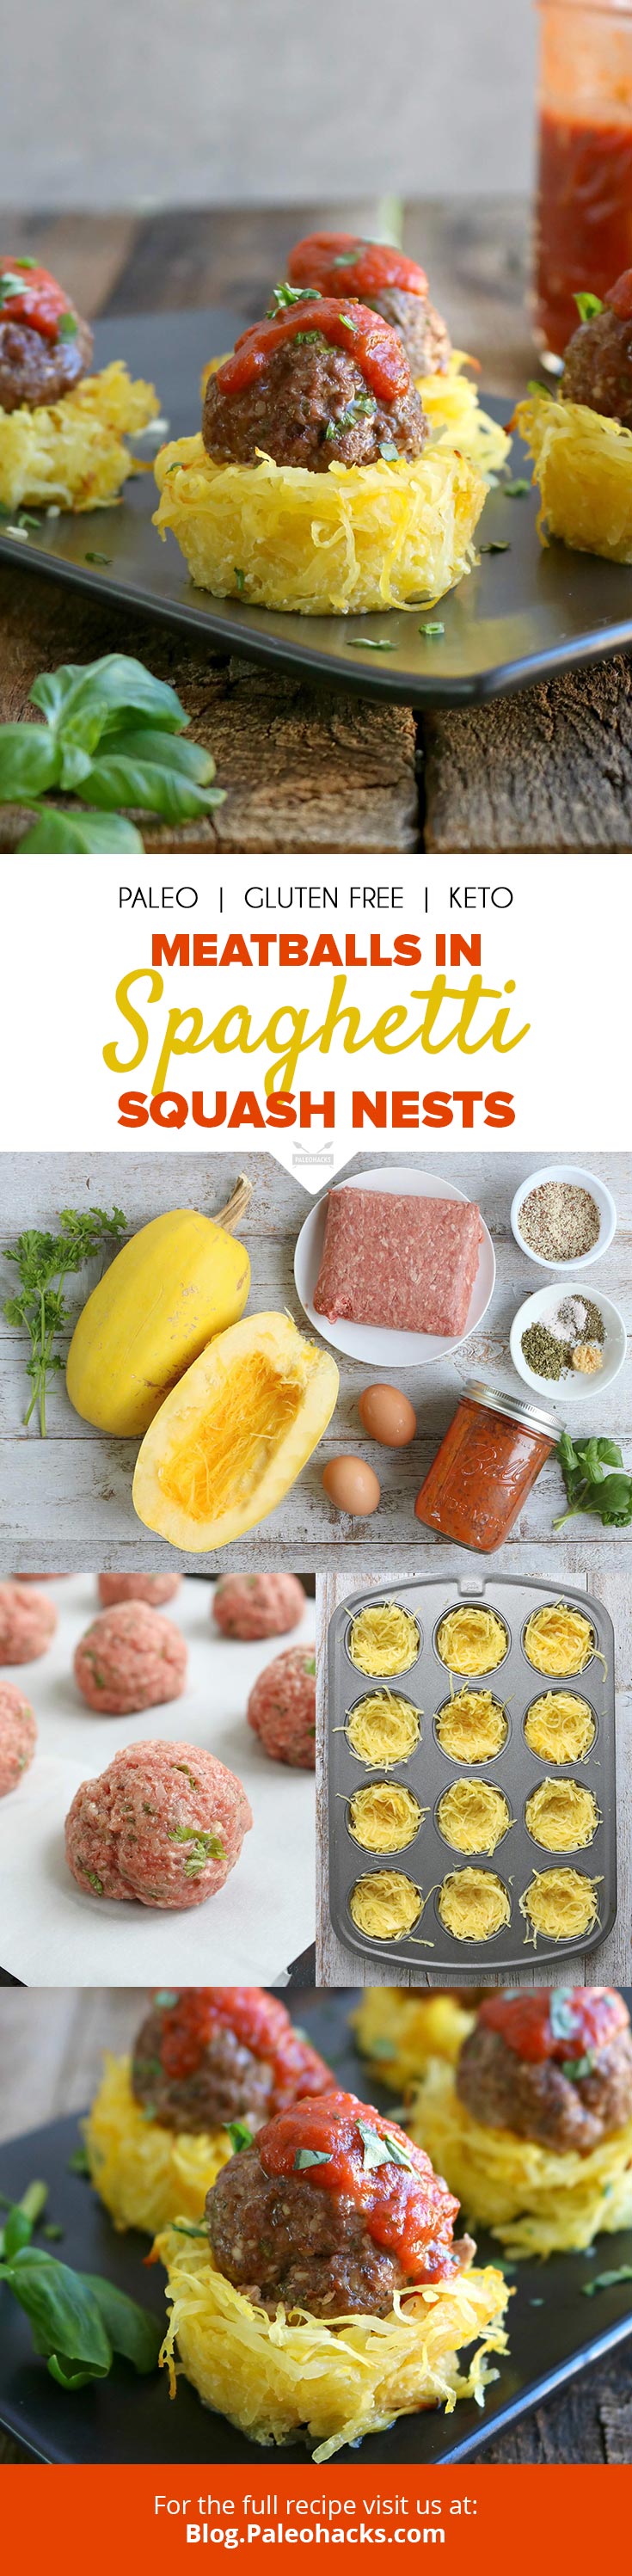 Put a fun twist on pasta night with these mini spaghetti squash nests filled with meatballs. Spaghetti squash nests are baked right in a muffin tin!